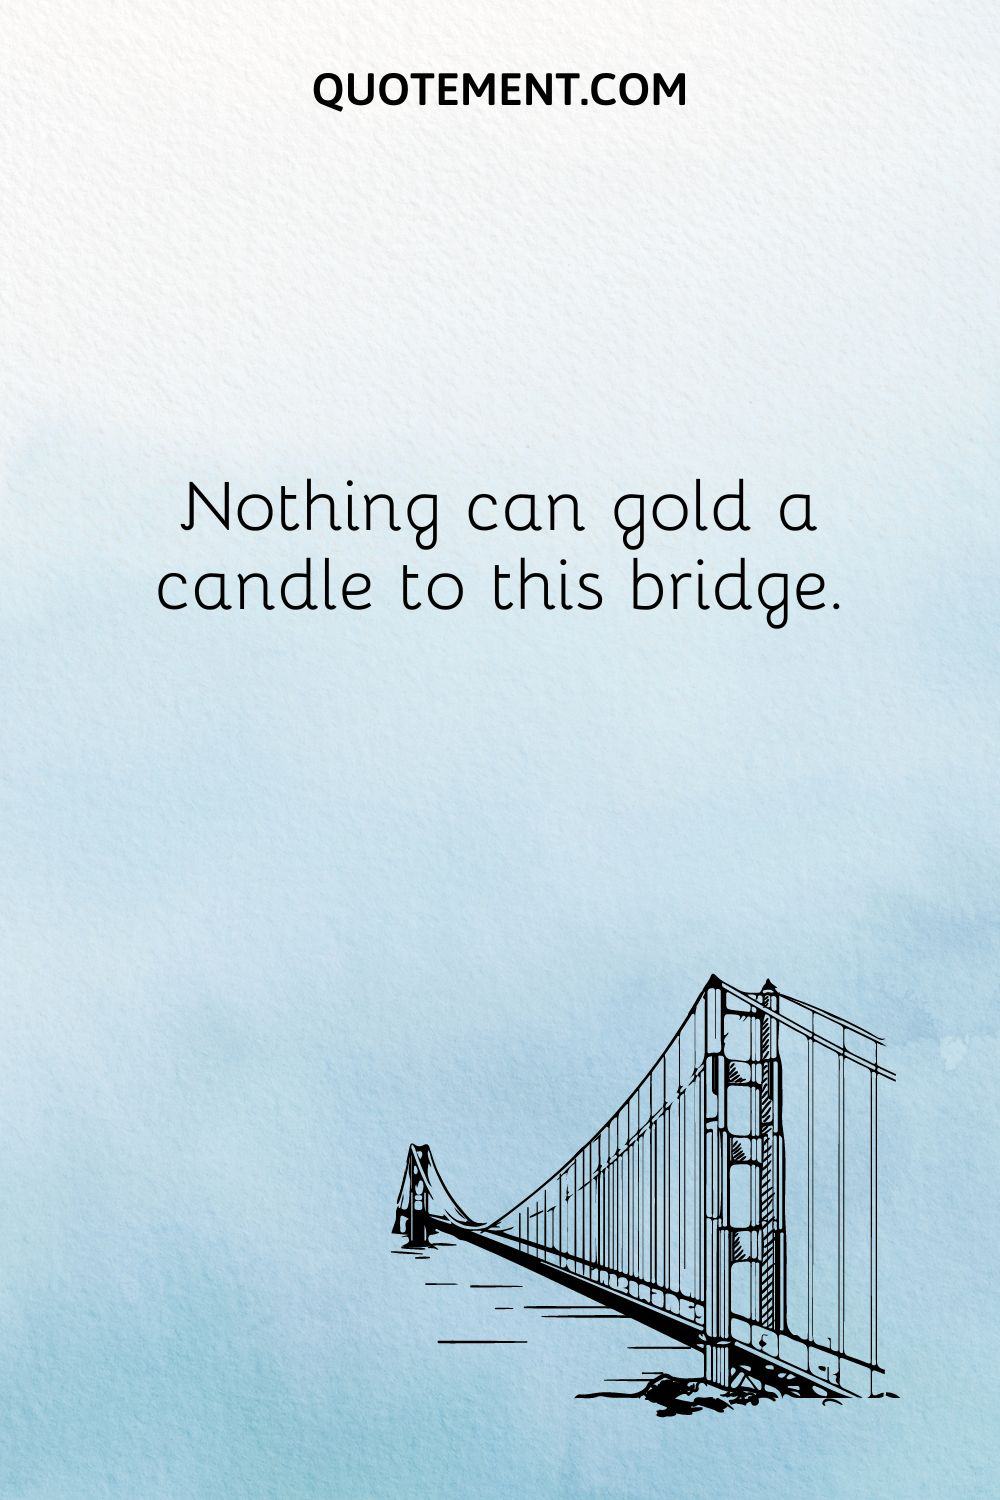  Nothing can gold a candle to this bridge.
